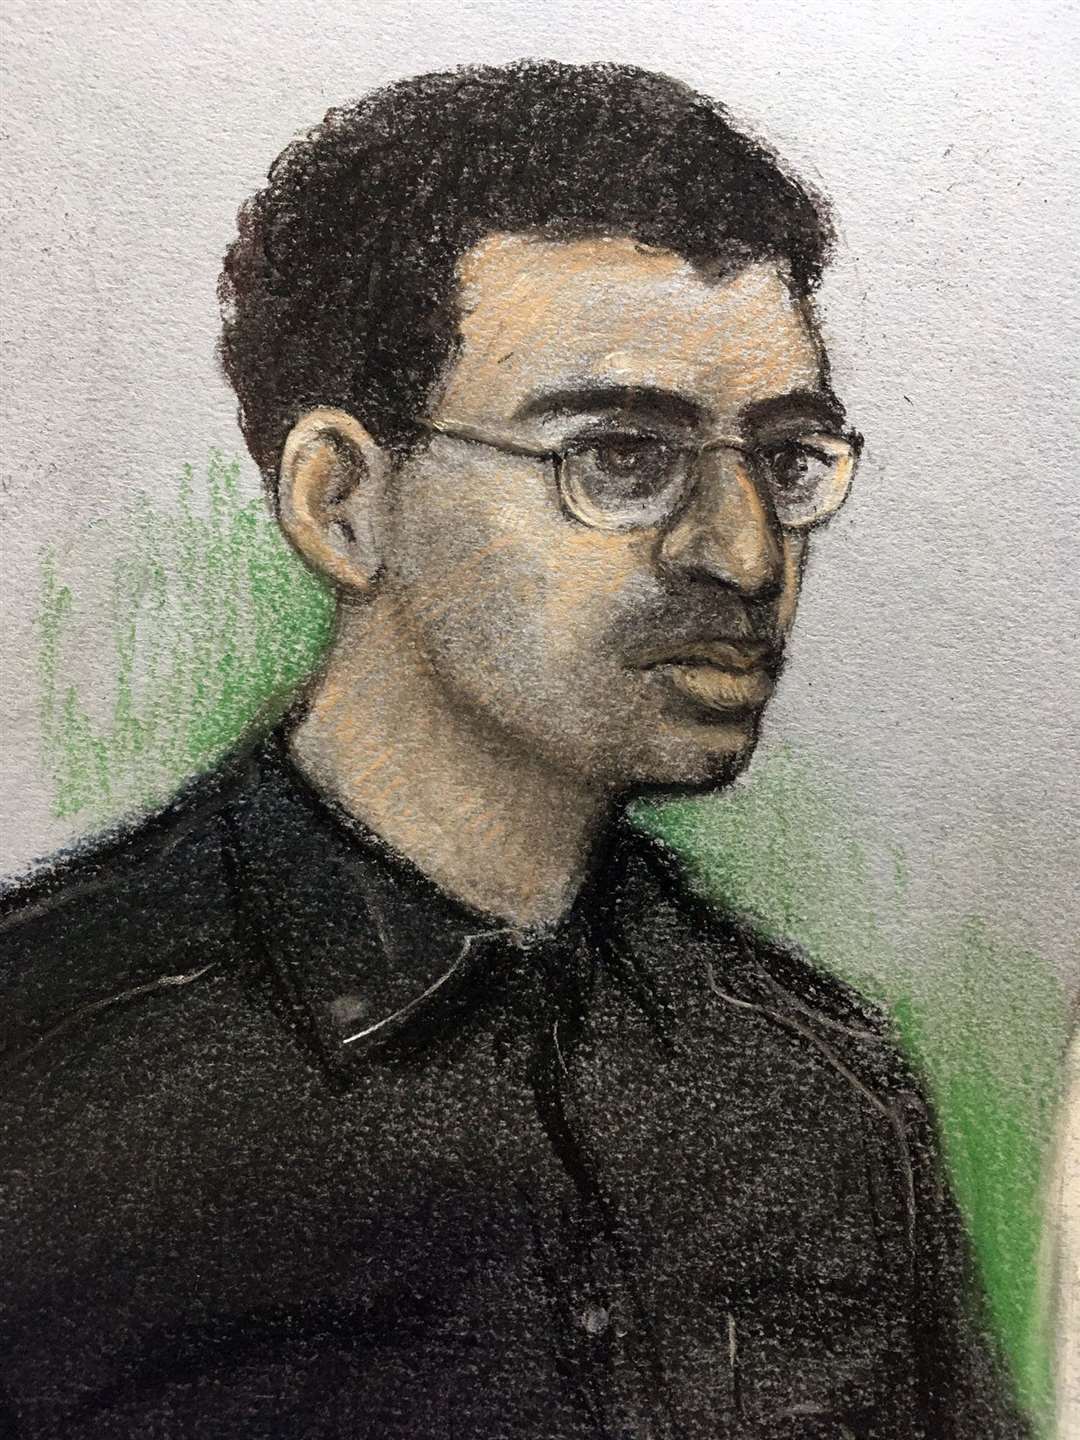 Hashem Abedi in a previous court appearance (Elizabeth Cook/PA